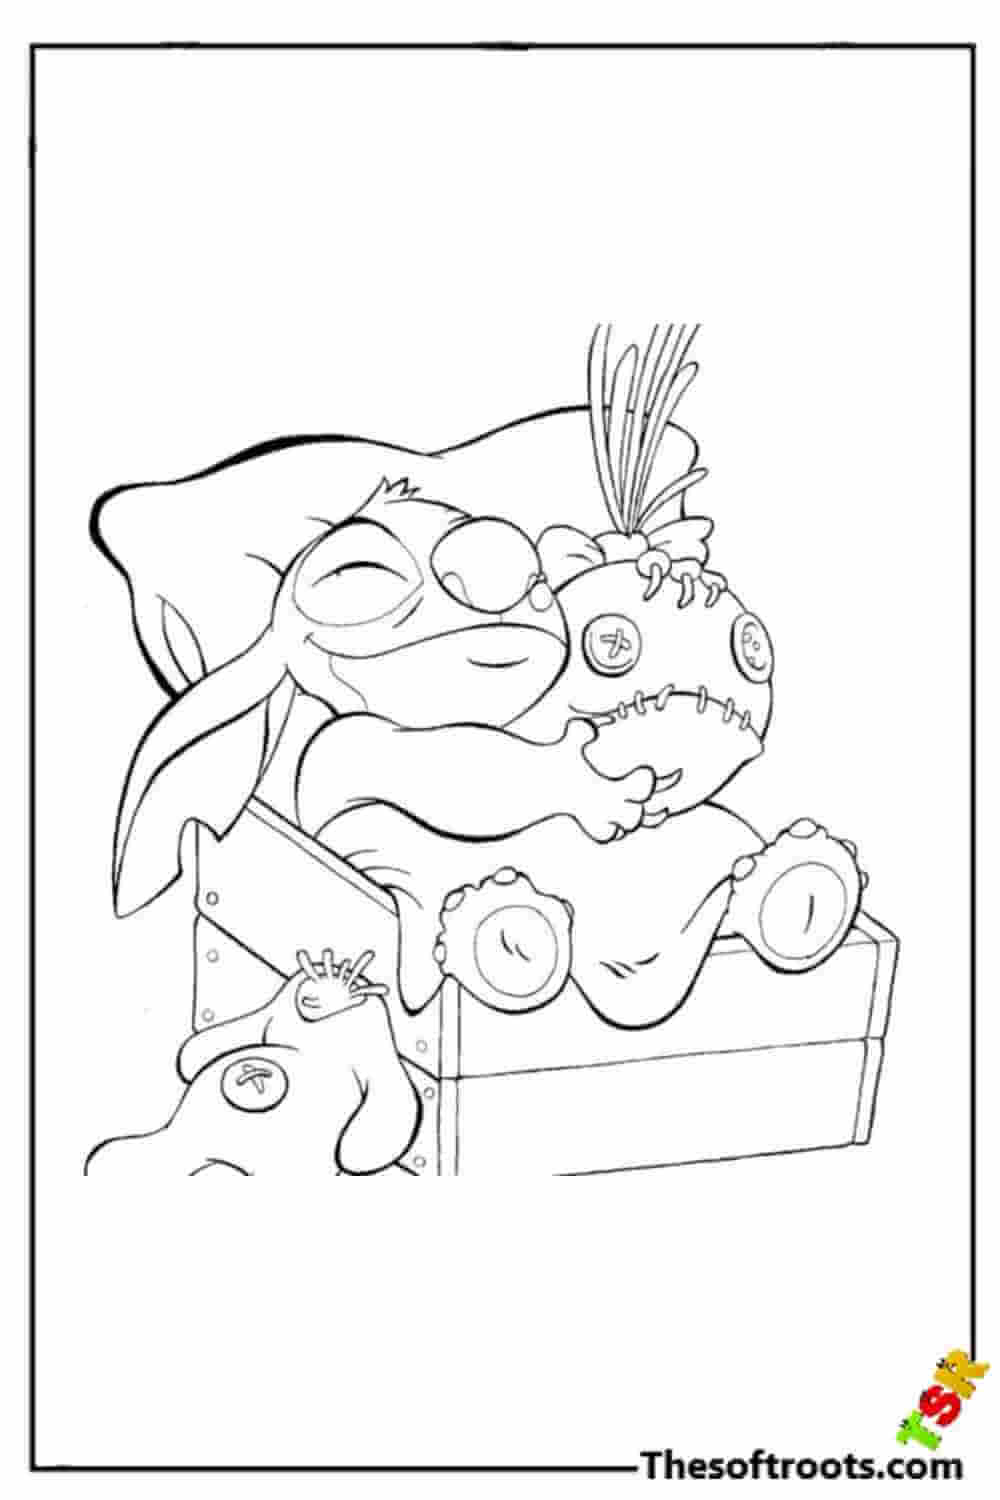 Sleepy Stitch coloring pages